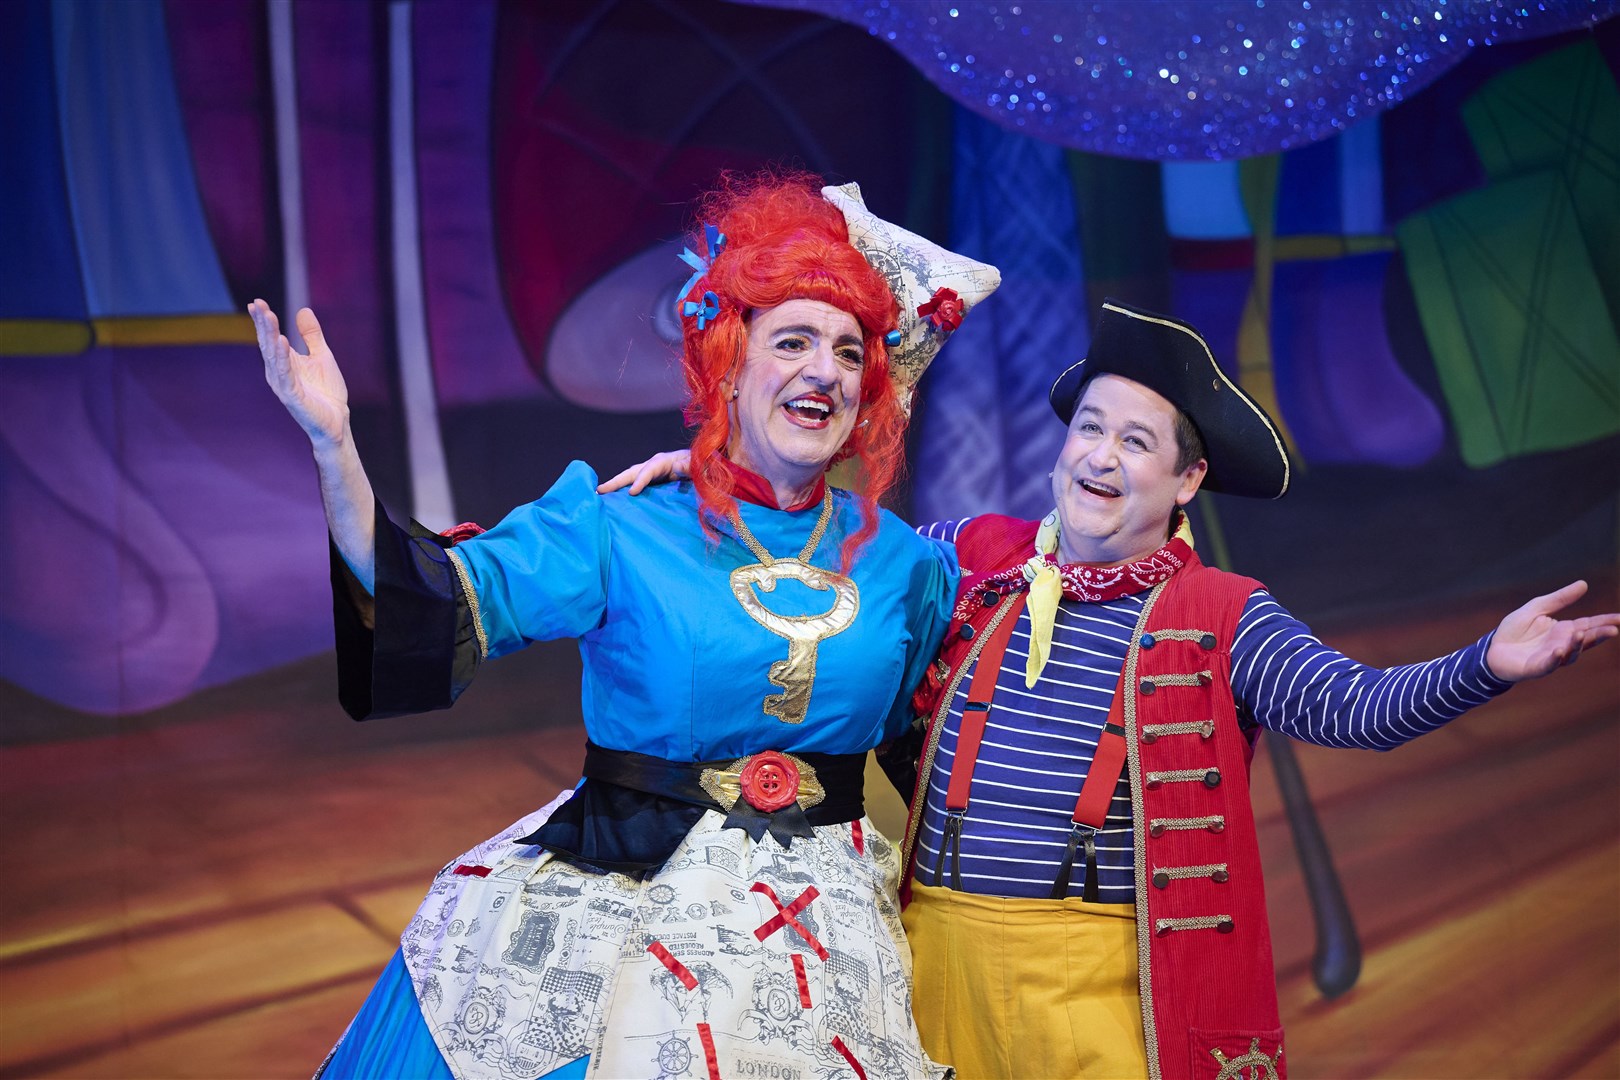 Steven Wren and Ross Allan in Peter Pan last year - reunited for ths year's panto Sleeping Beauty.